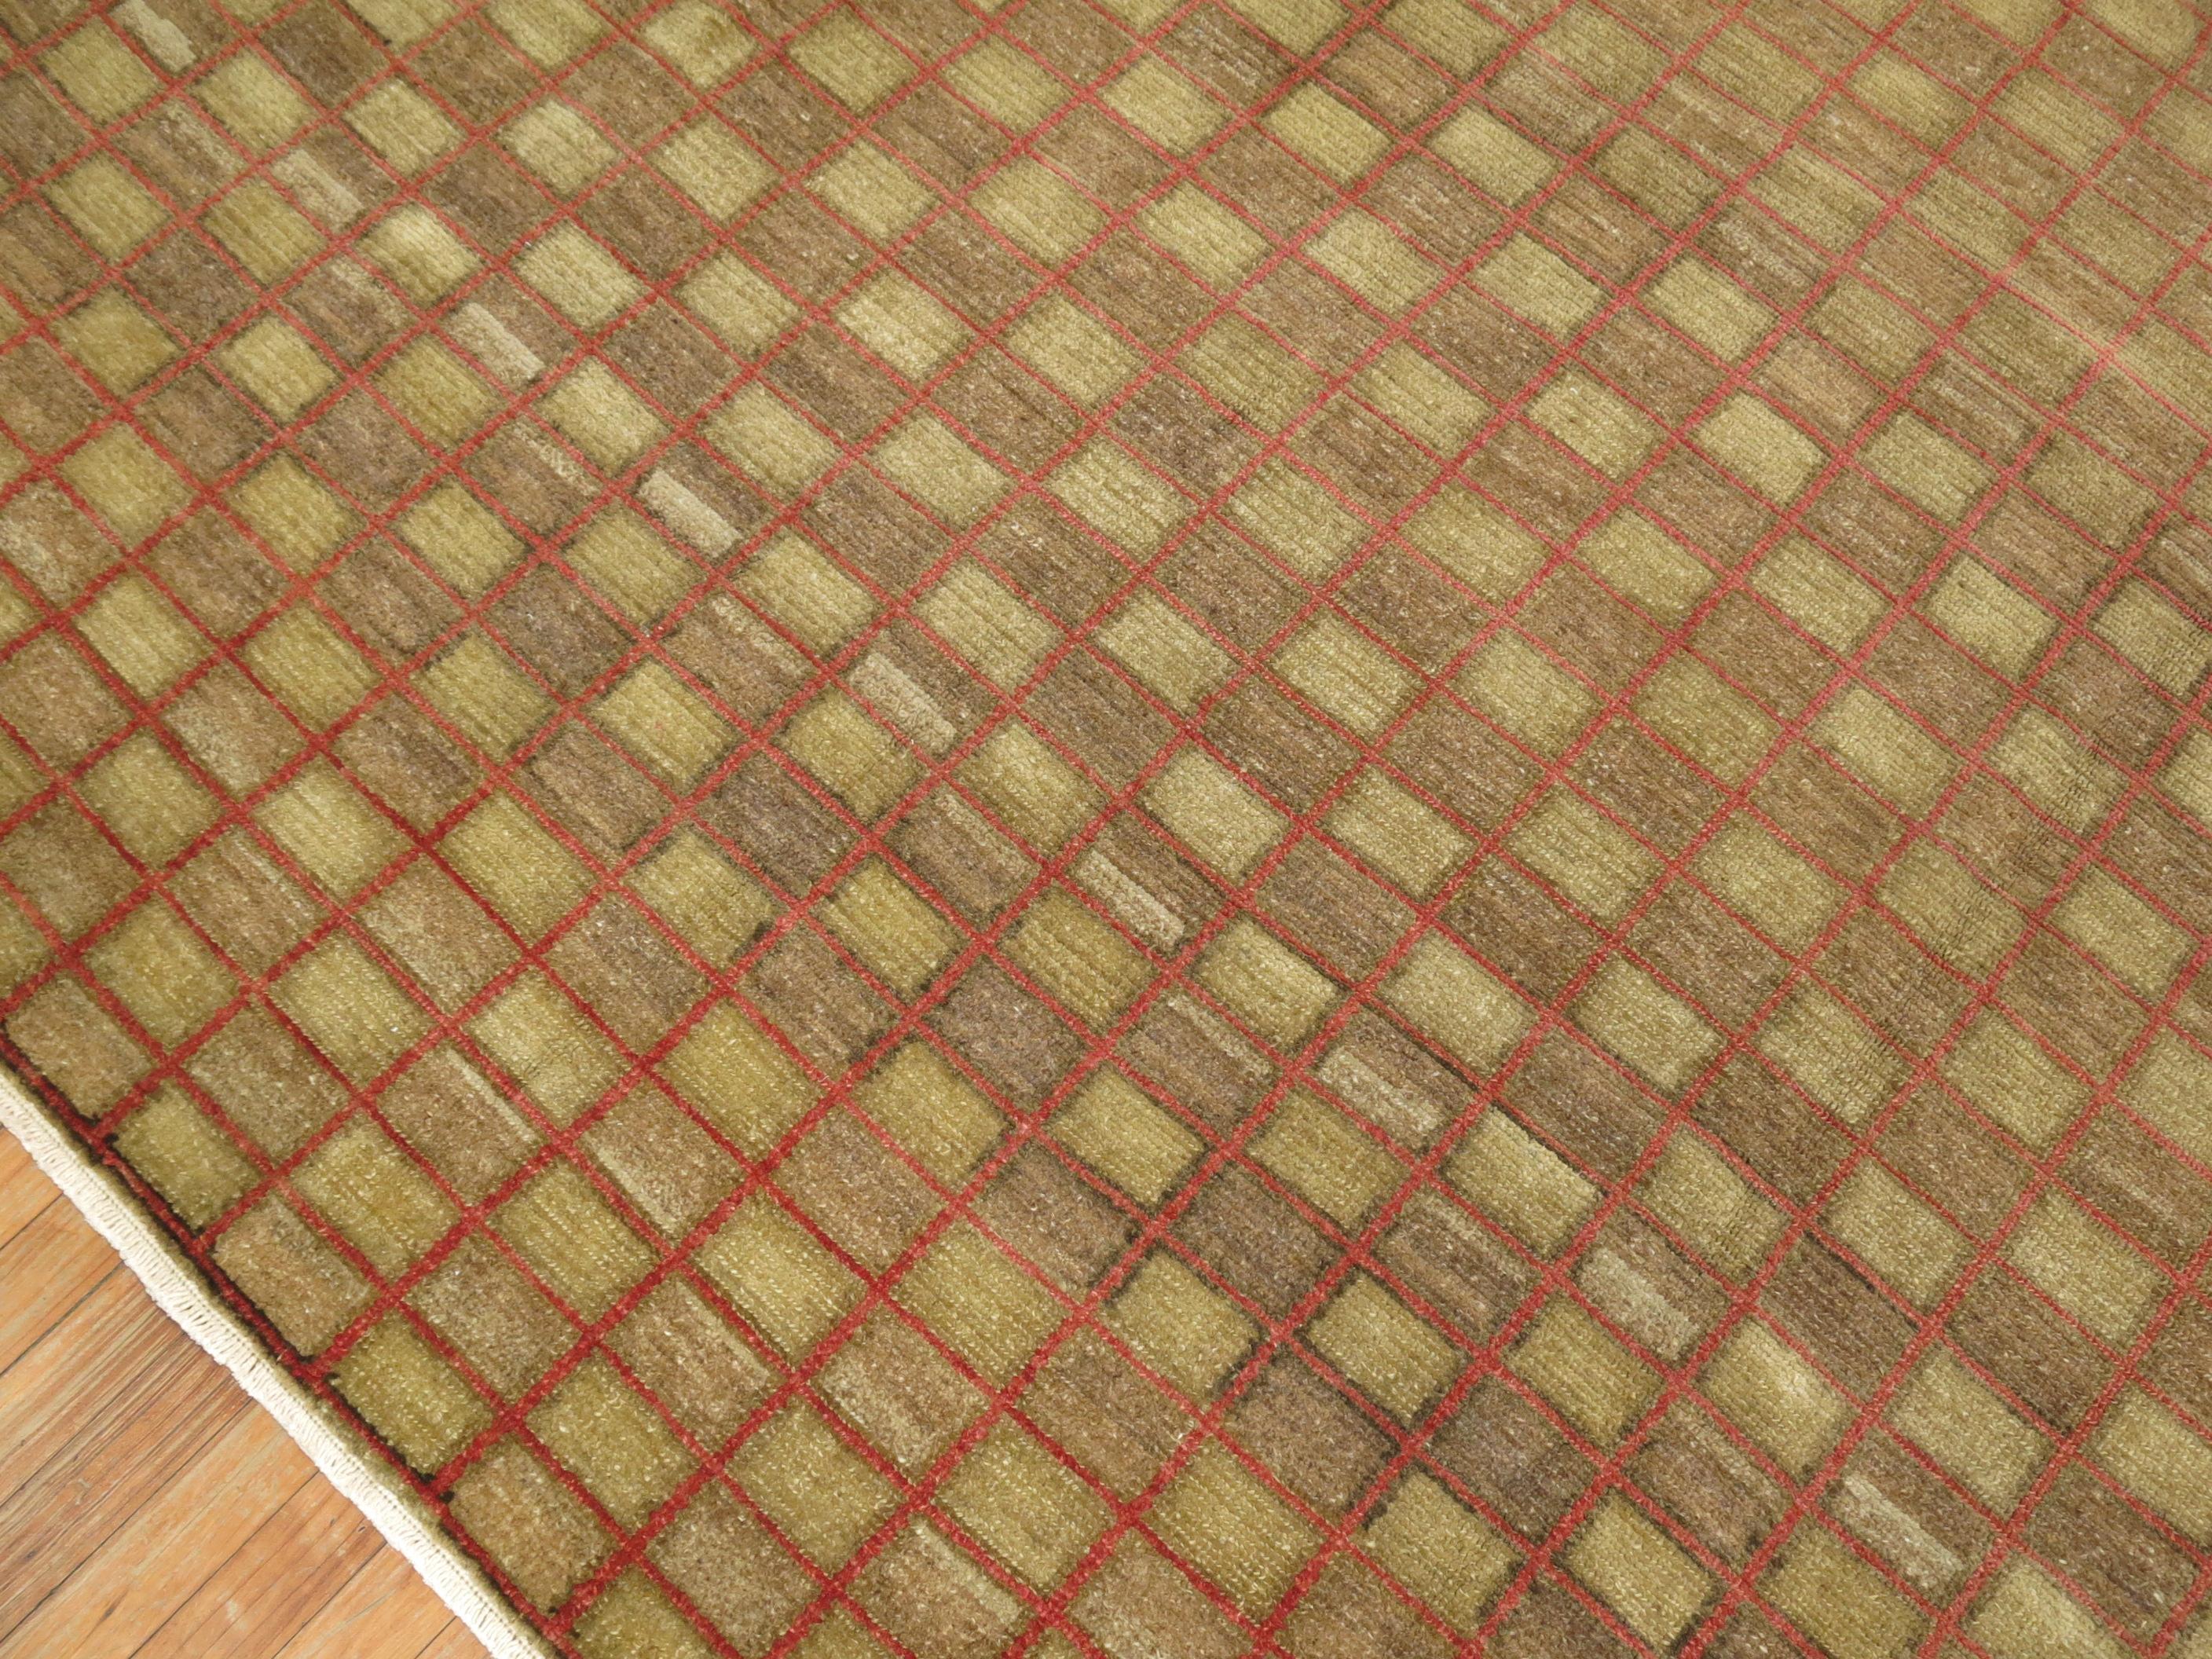 A Turkish Anatolian checkered room-size carpet handmade during the mid-20th century with an all-over checkerboard pattern racing over a brown color ground

Measures: 10' 10